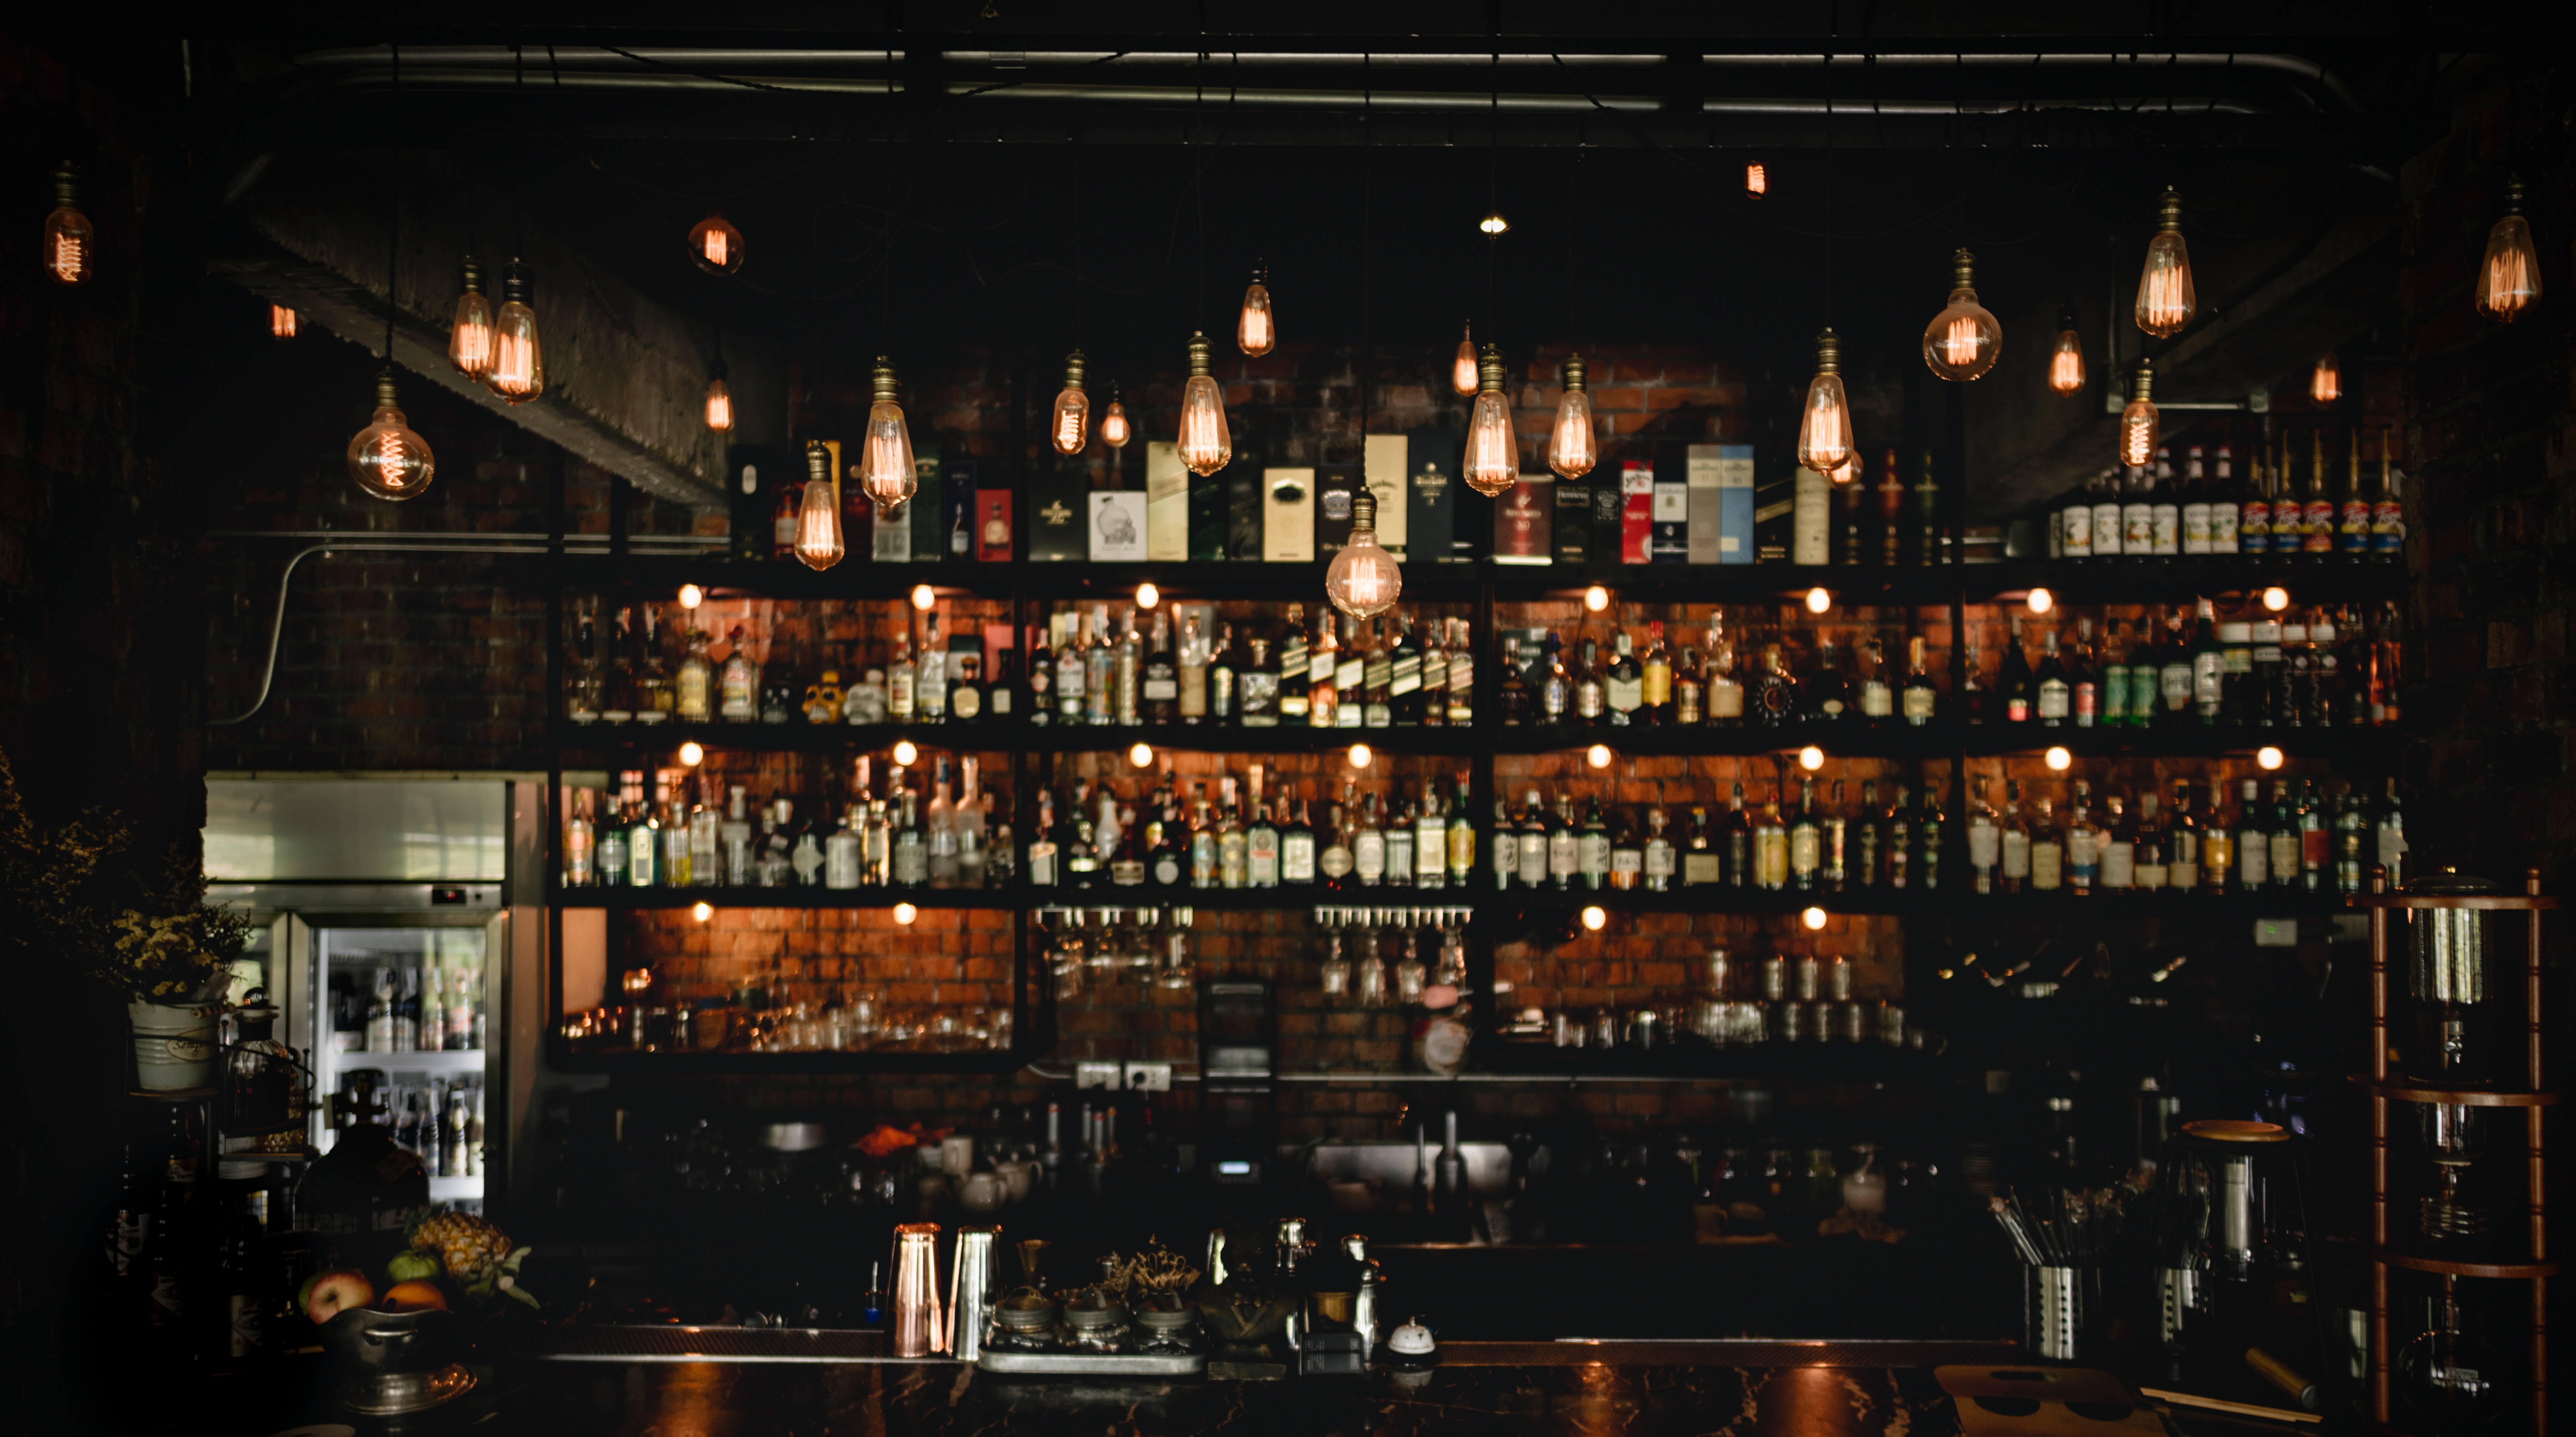 Restaurants And Bars Could Be A Good Place To Pick Up Potential Investments